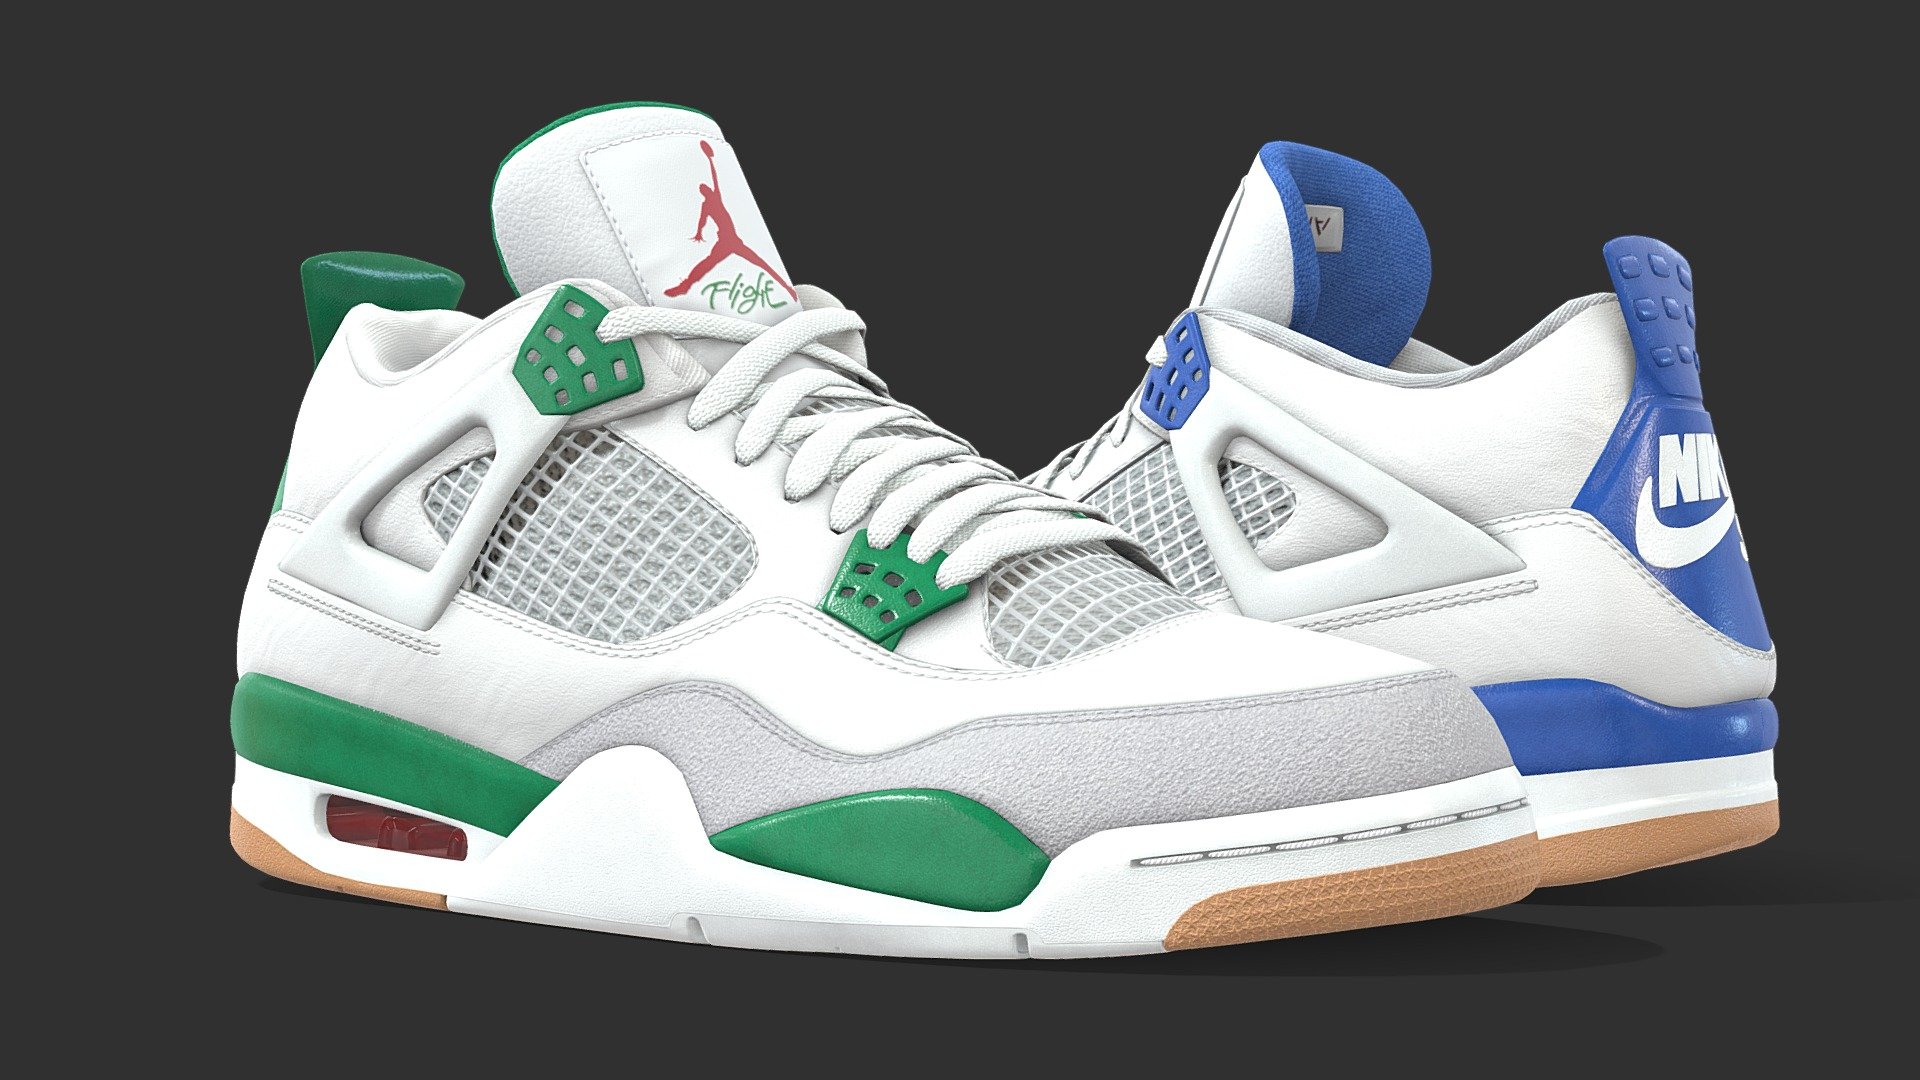 Jordan 4 SB in the Pine Green and Sapphire Blue colourways. The Pine Green released in March 2023 with the Sapphire Blue rumoured to release sometime after. 

Optimised, low poly version of my Jordan 4 model in 2 new colourways. The mesh uses one texture set per shoe and each shoe has a polycount of 24,636. This version would be ideal for in game use, or as an accessory to a render where the shoes are not the focus. 

Included in the additional files: 
Blender file with linked textures
Fbx and OBJ version
All textures (Base Color, Roughness, Normal, AO, Opacity) 

Opacity was use on the air bubble and mesh parts of the upper. You can use the base color, or opacity map provided to use it. Clean, quad topology was used throughout the shoe (exceptions being on the flat part of the sole) 

If you have any questions or general queries you can contact me here: worksofwall@gmail.com - Jordan 4 SB Pine Green Pack - Buy Royalty Free 3D model by Joe-Wall (@joewall) 3d model